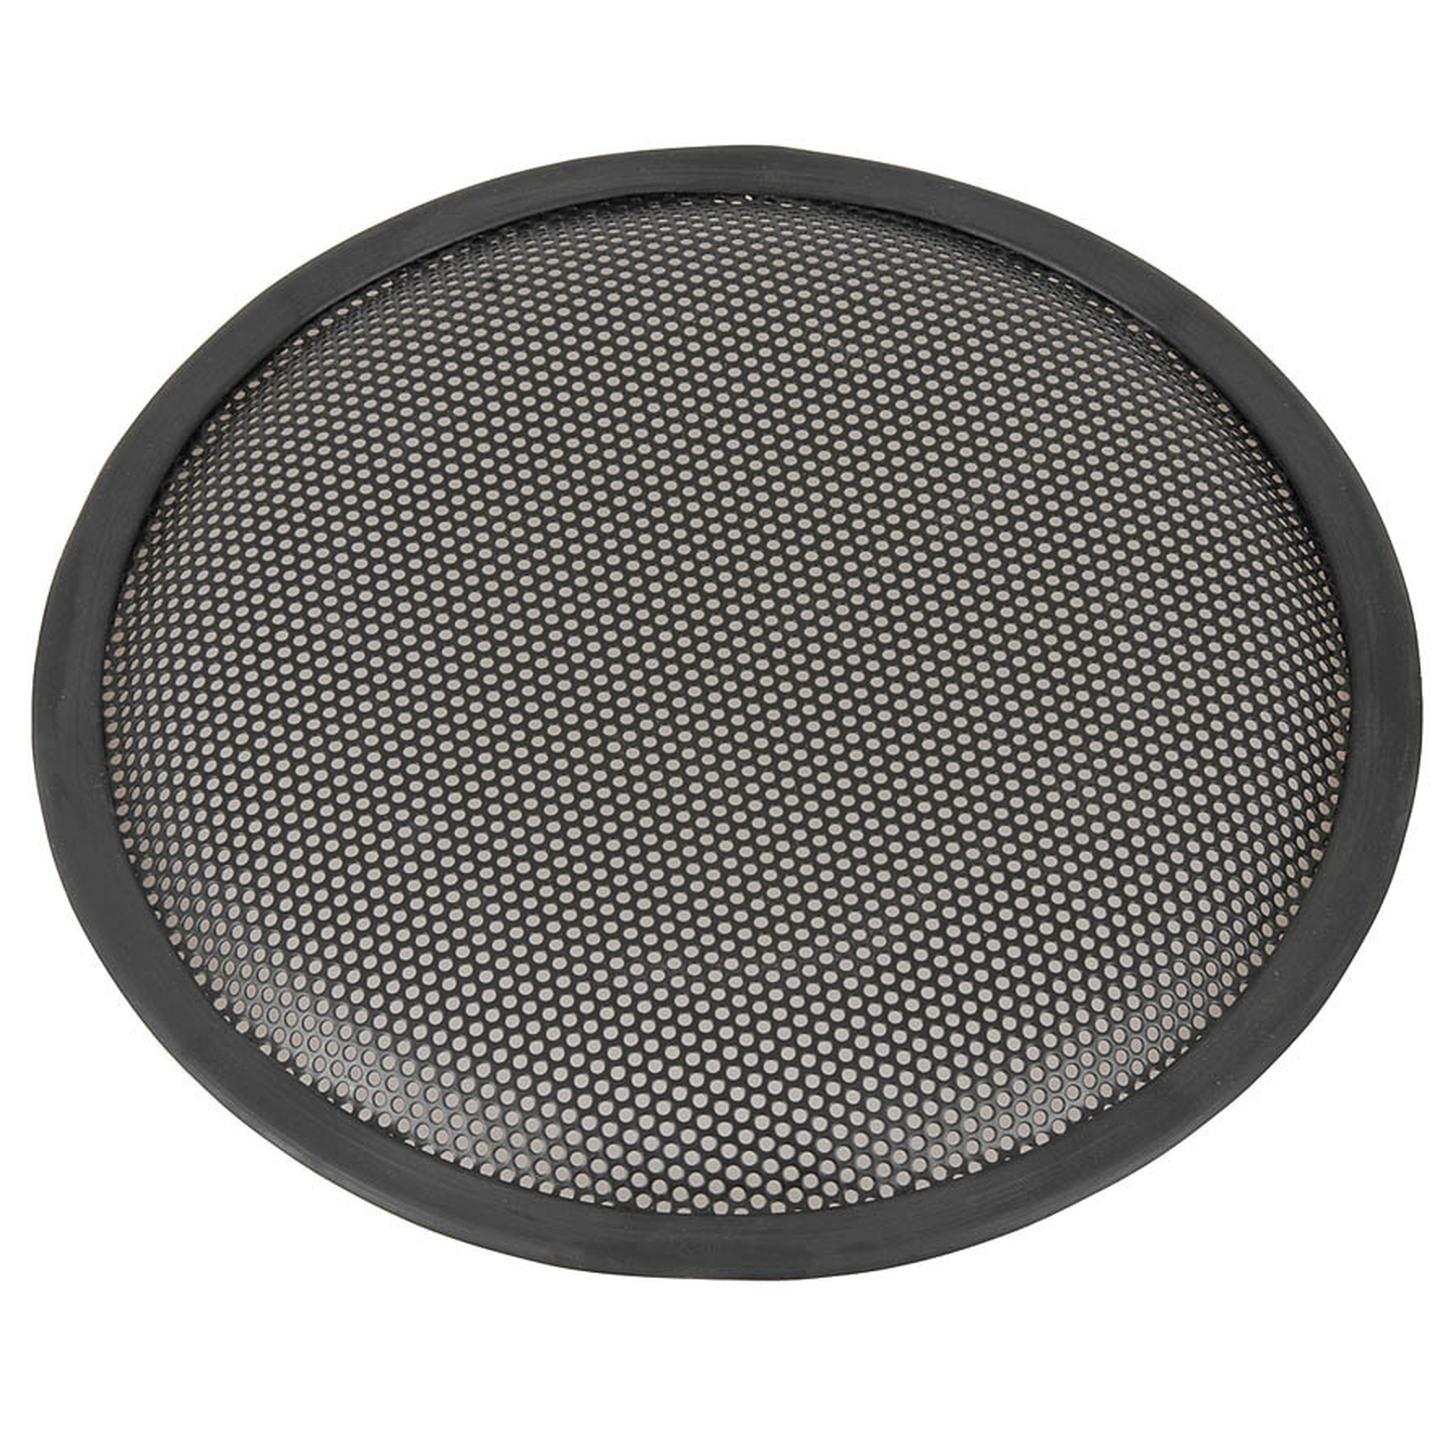 8 Speaker Protection Grille with Clips